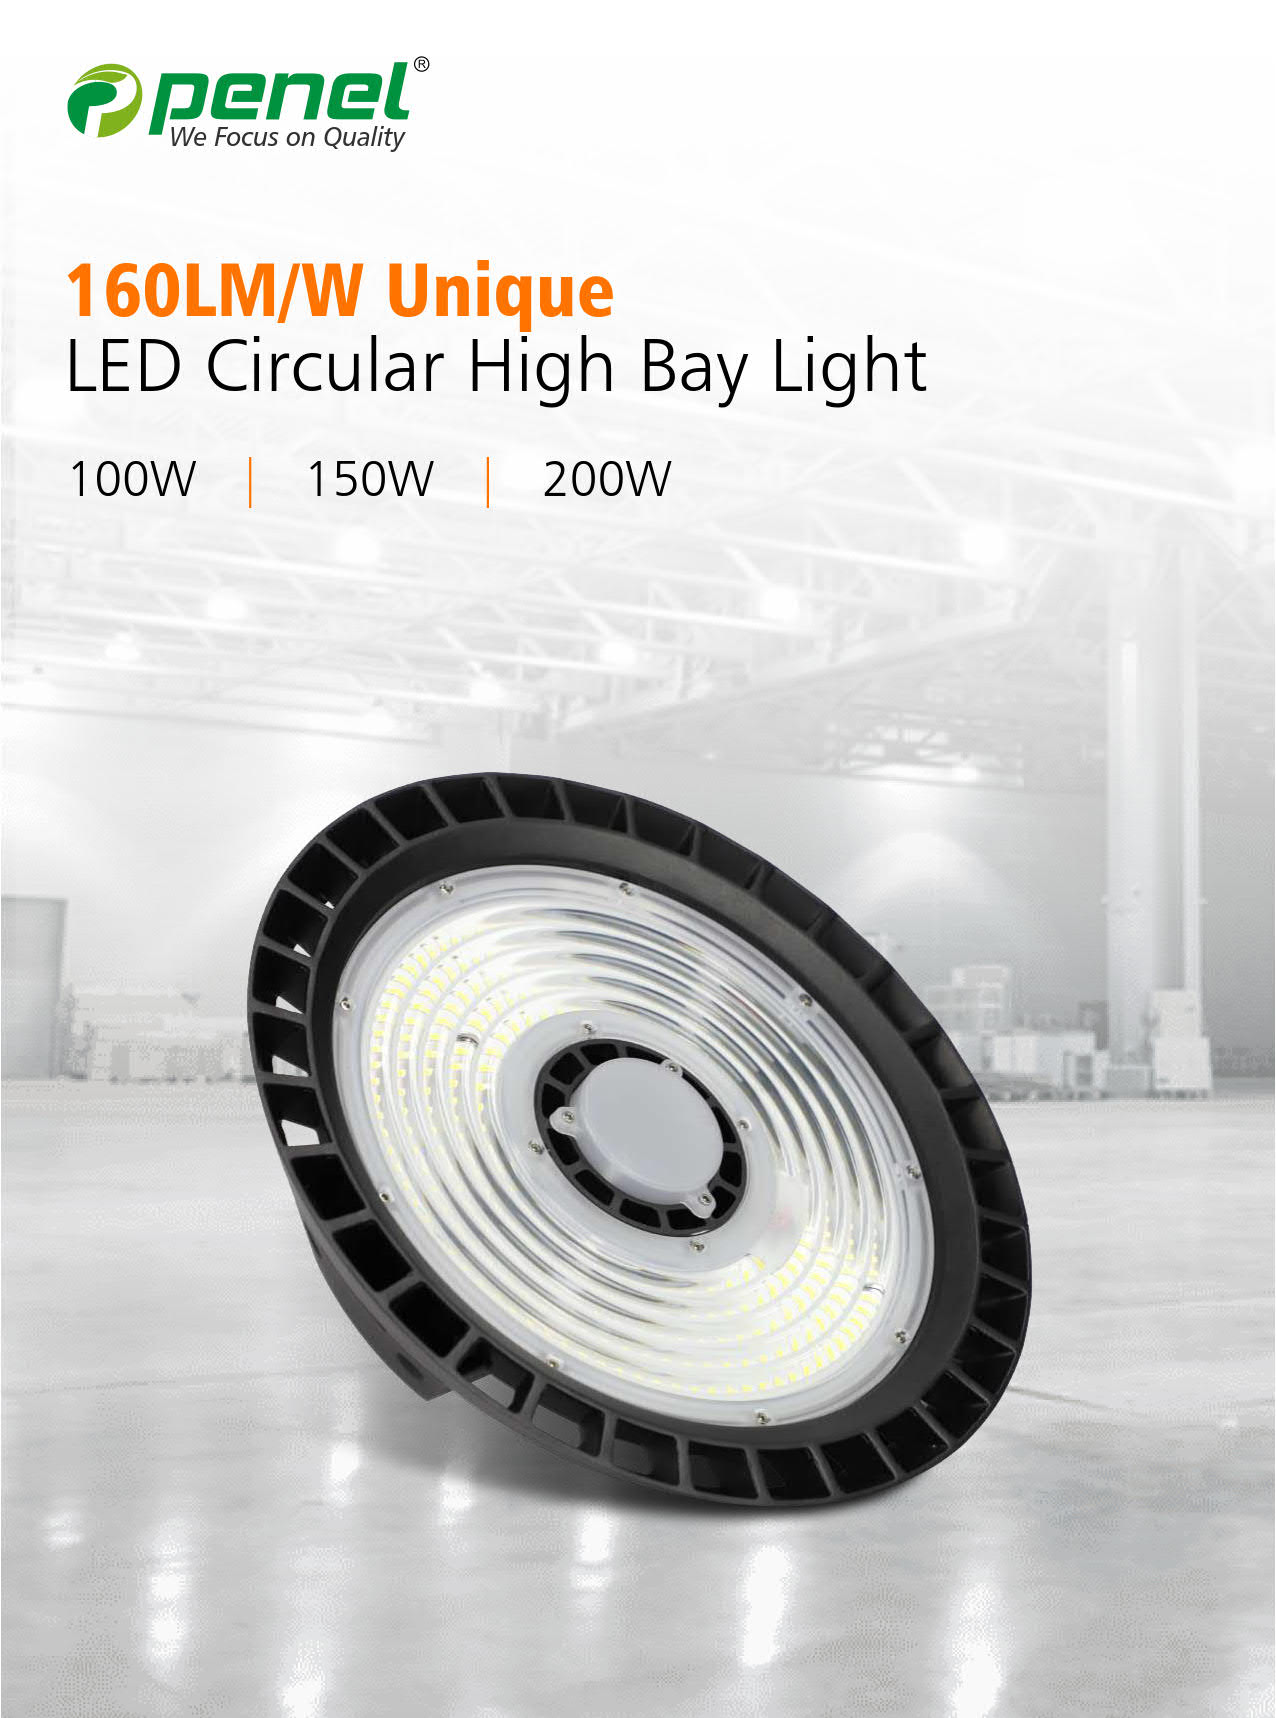 Datasheet of HBL-NS06 (160LMW New Circular LED High Bay Light from PENEL)